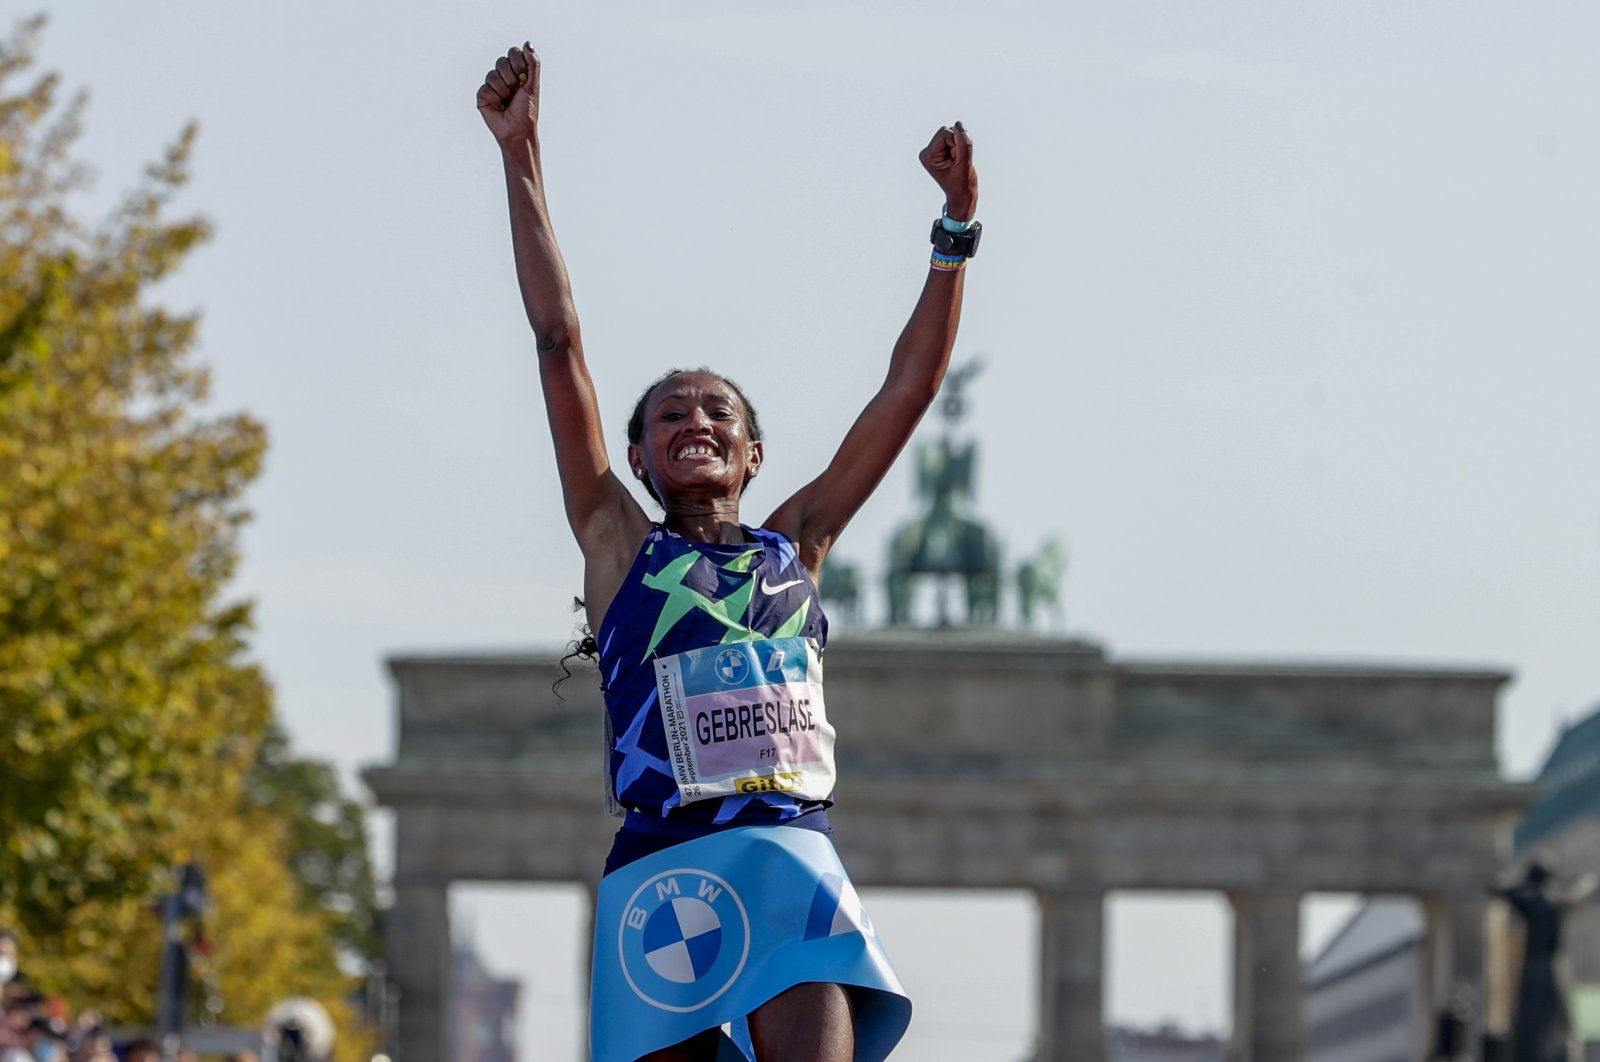 Ethiopia's Gotytom Gebreslase celebrates as she crosses the finish line to win the women's division of the Berlin Marathon in Berlin, Germany, Sept. 26, 2021. (AP Photo)